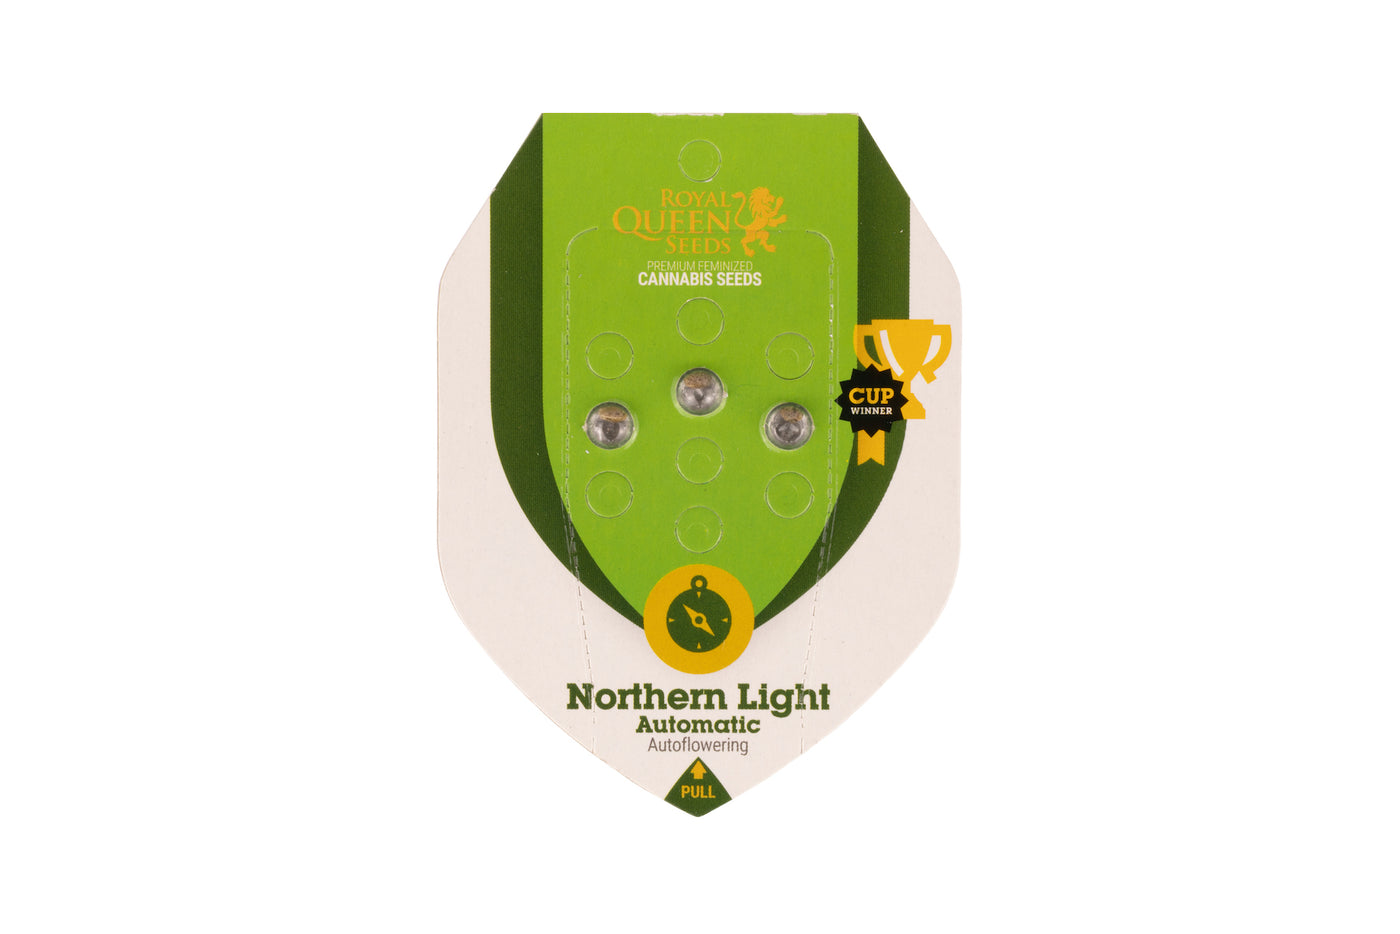 Northern Light Automatic - Royal Queen Seeds - Bongae 